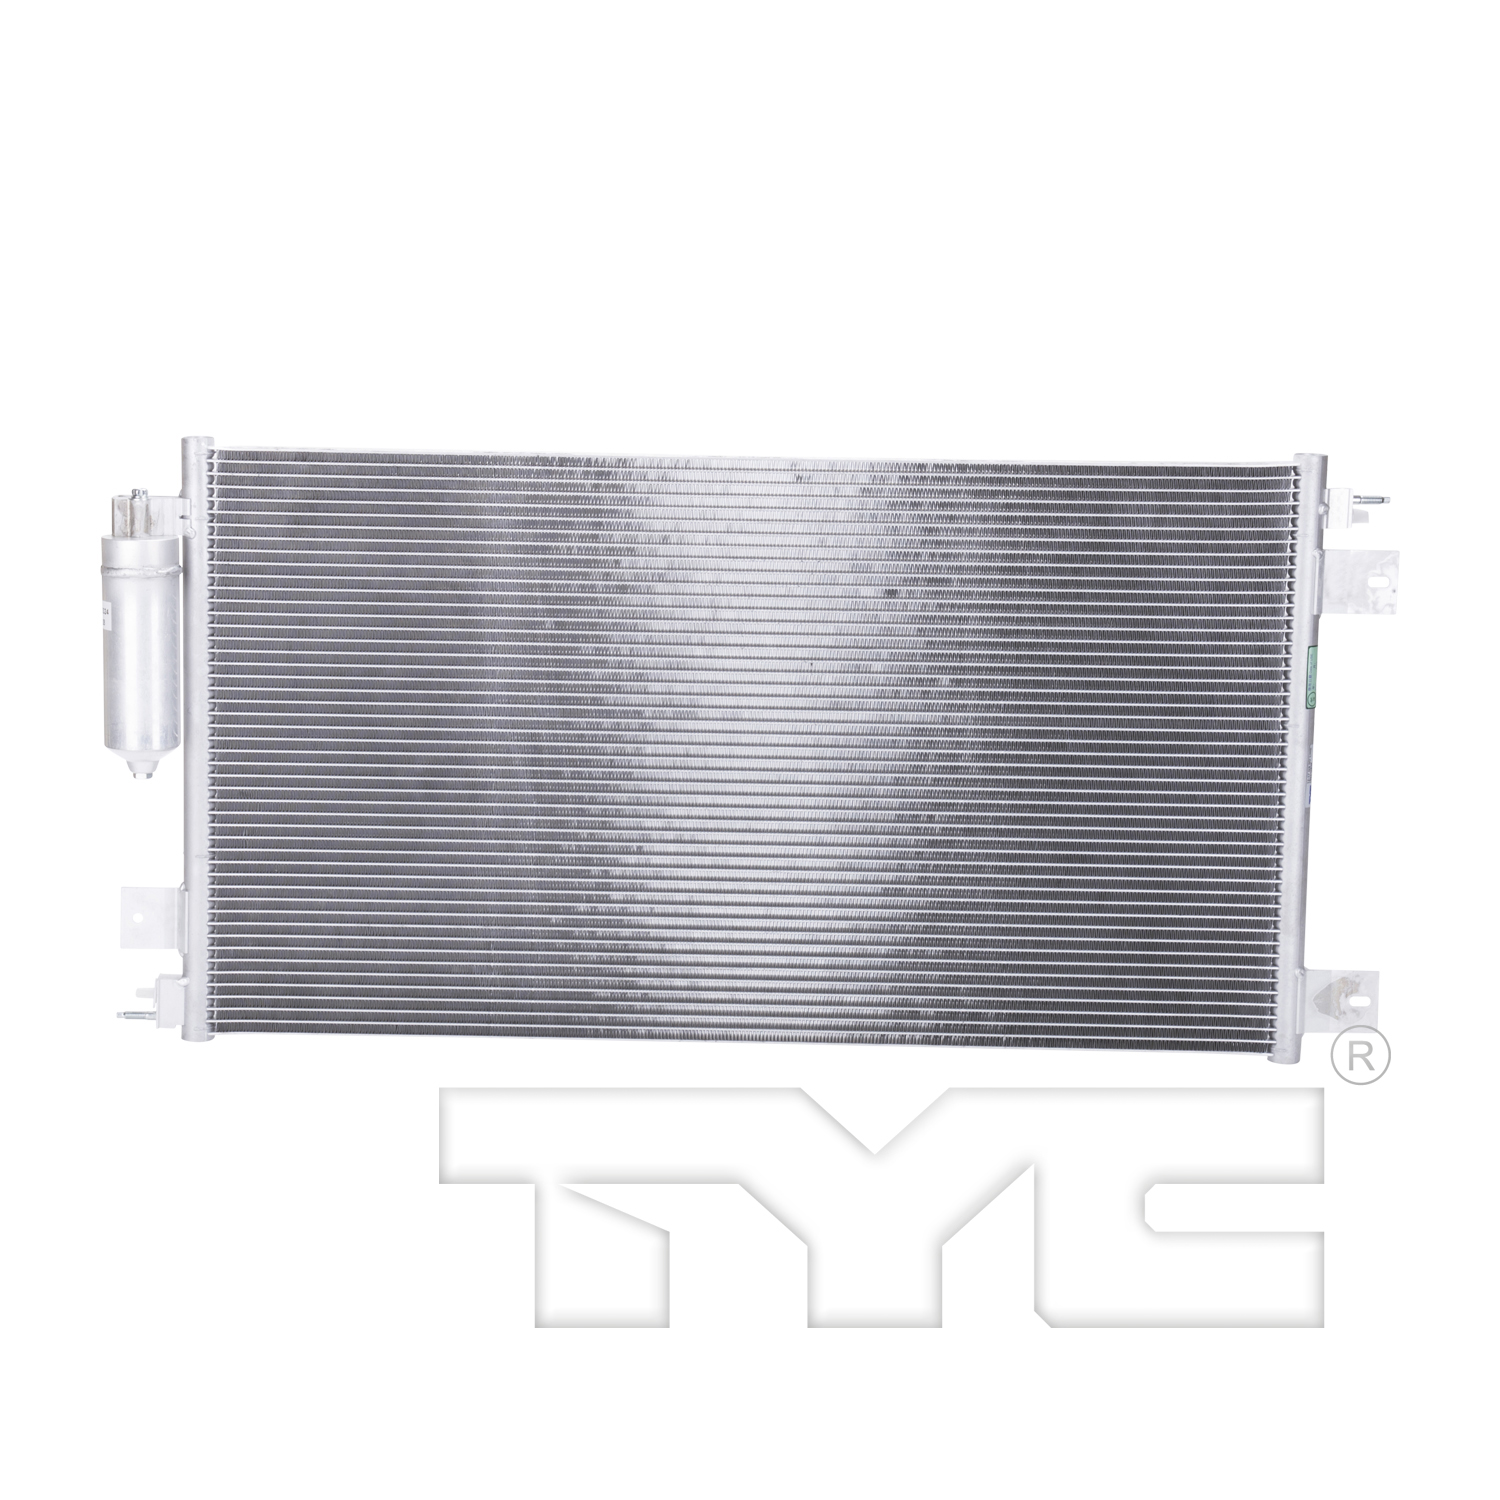 Aftermarket AC CONDENSERS for NISSAN - NV2500, NV2500,12-21,Air conditioning condenser